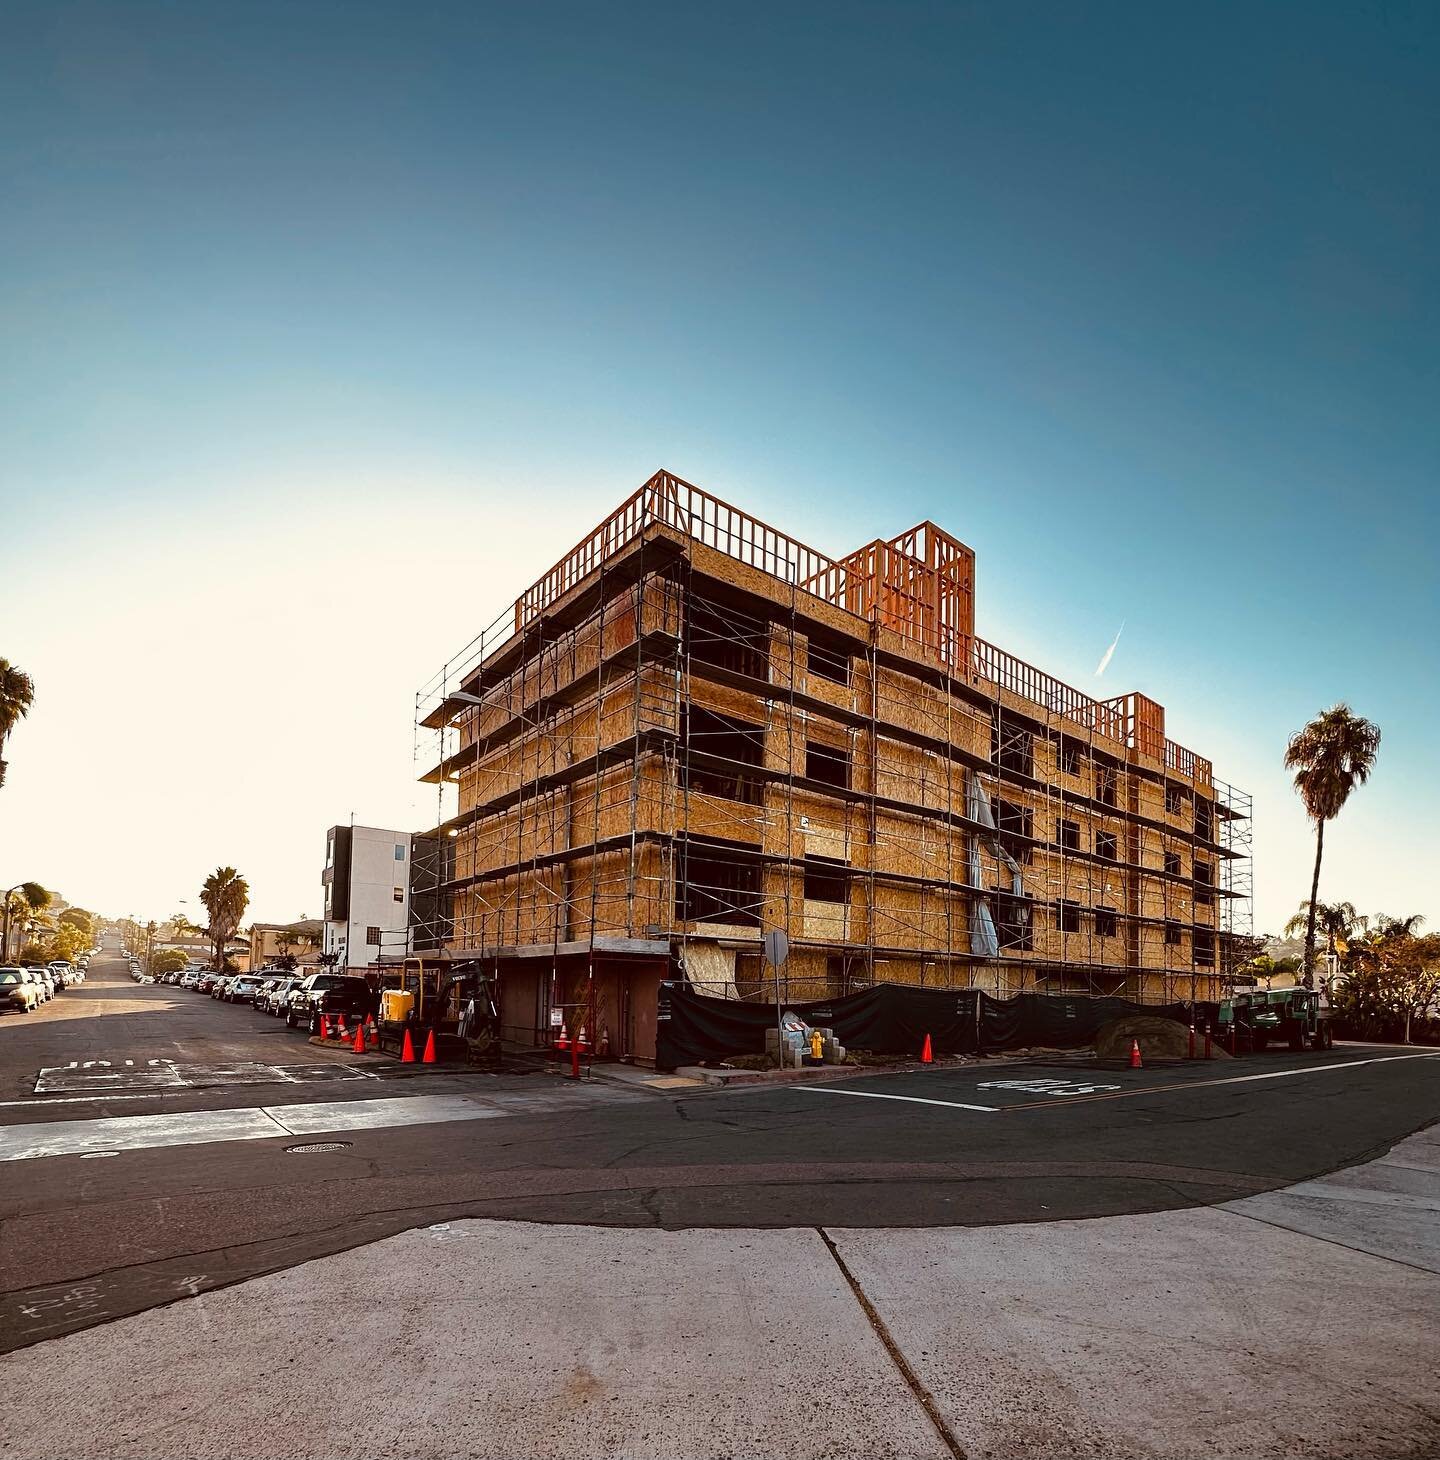 Coming back to this 14 unit apartment complex and adding a few ADUs in the parking garage. 

#sandiego #urbaninfill #architecture #sandiegoarchitect #development #housingcrisis #affordablehousing